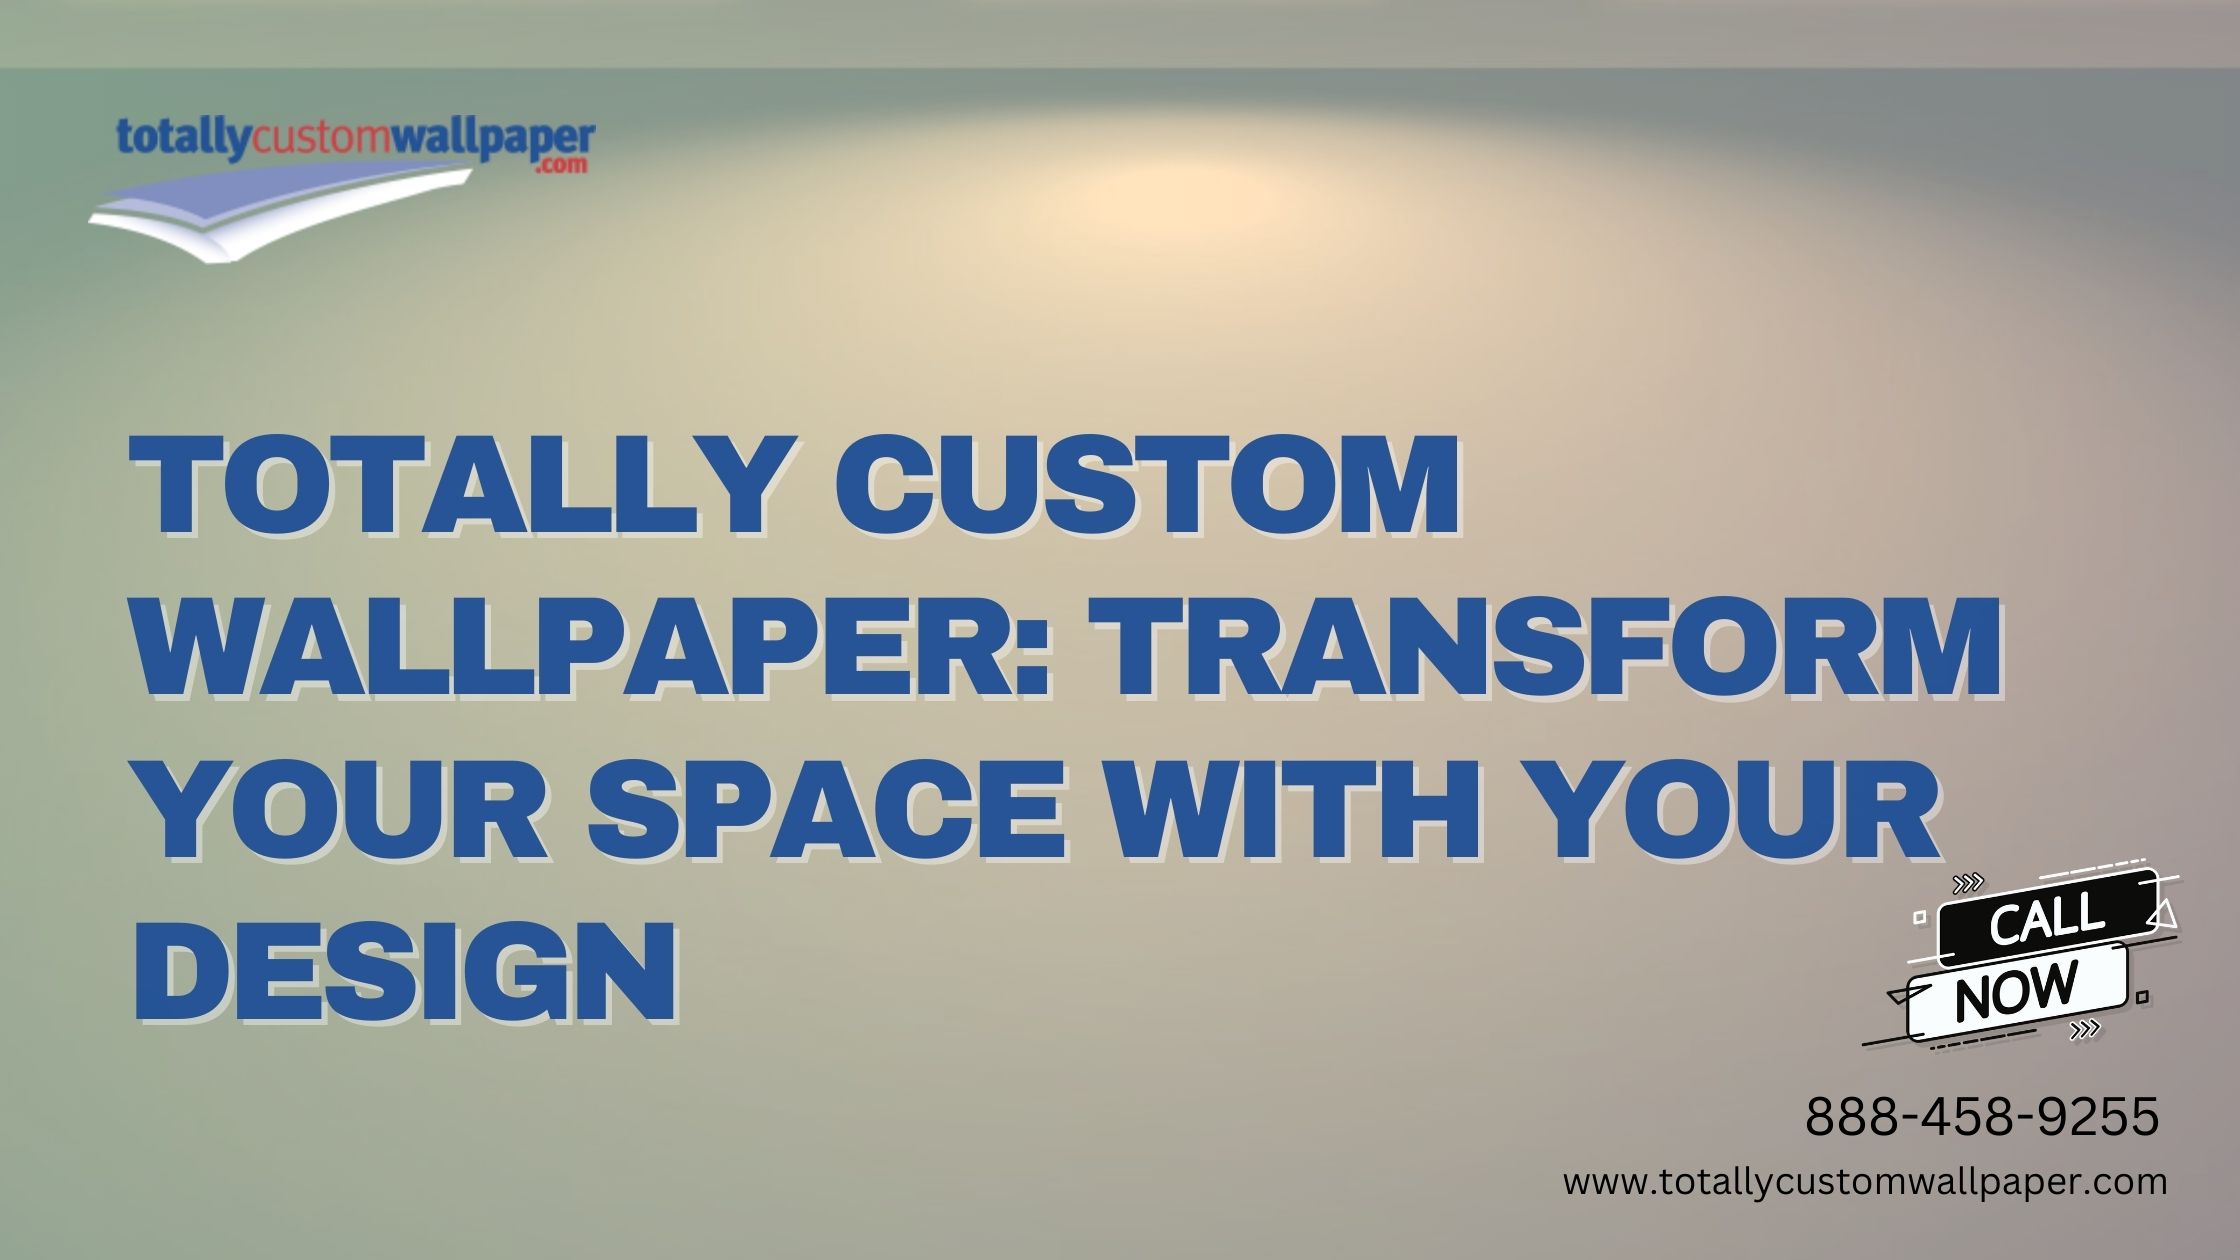 Totally Custom Wallpaper Transform Your Space with Your Design 1